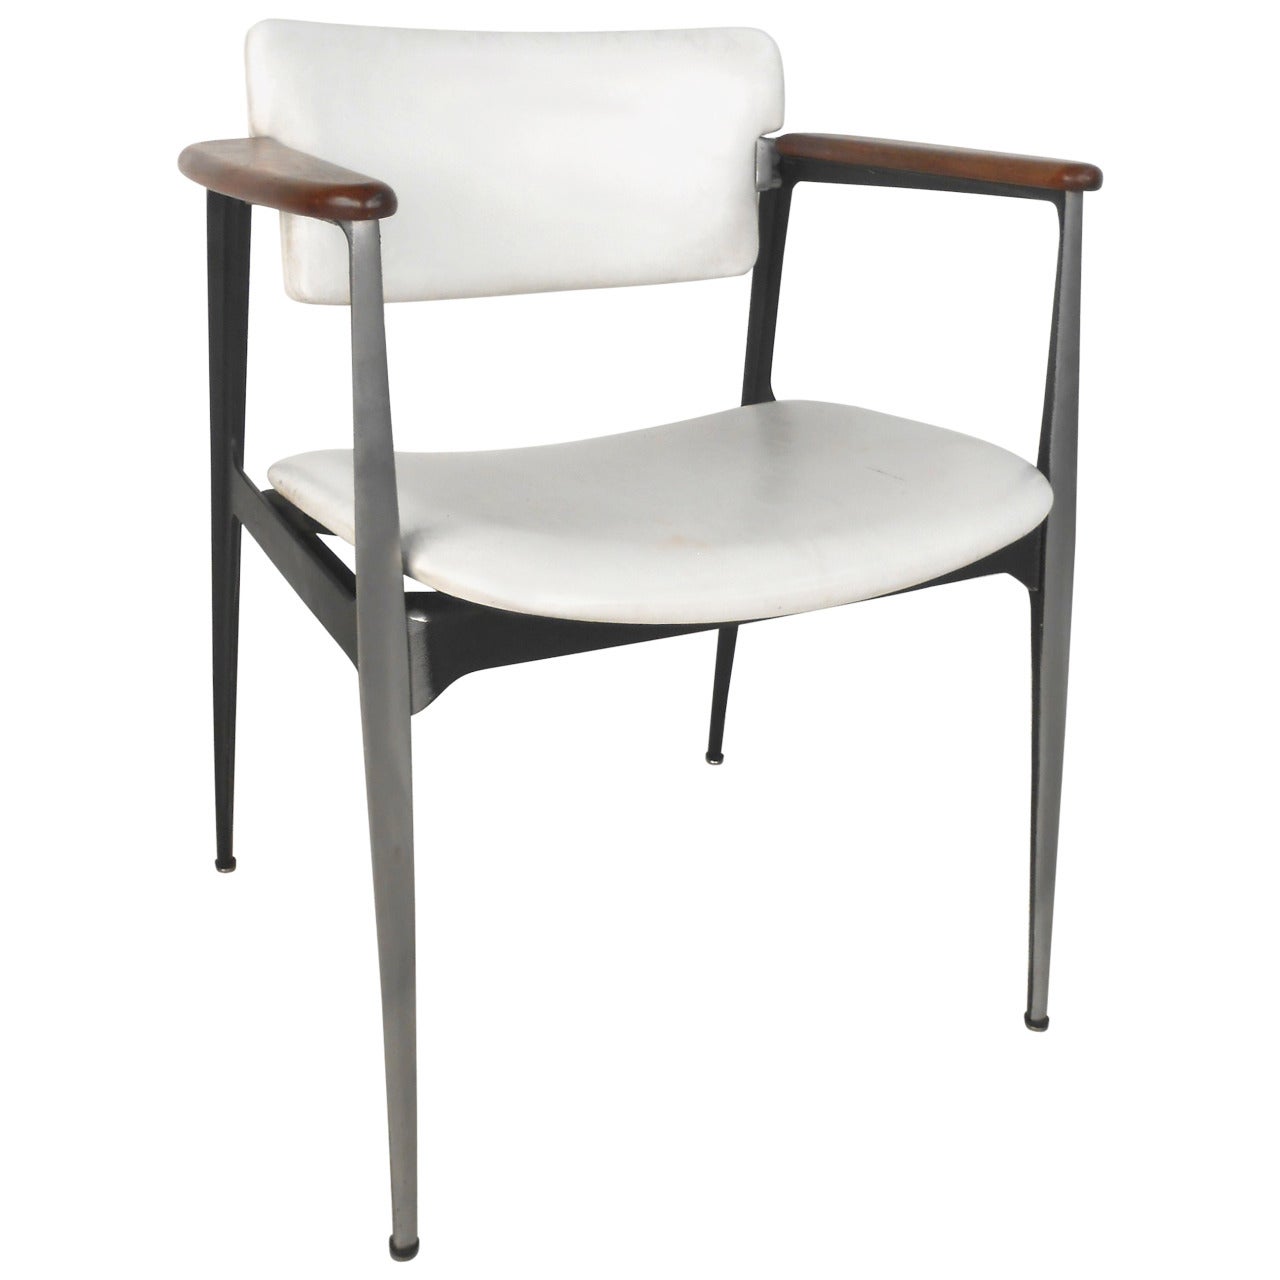 Shelby Williams 'Gazelle' Chair By Crucible Products